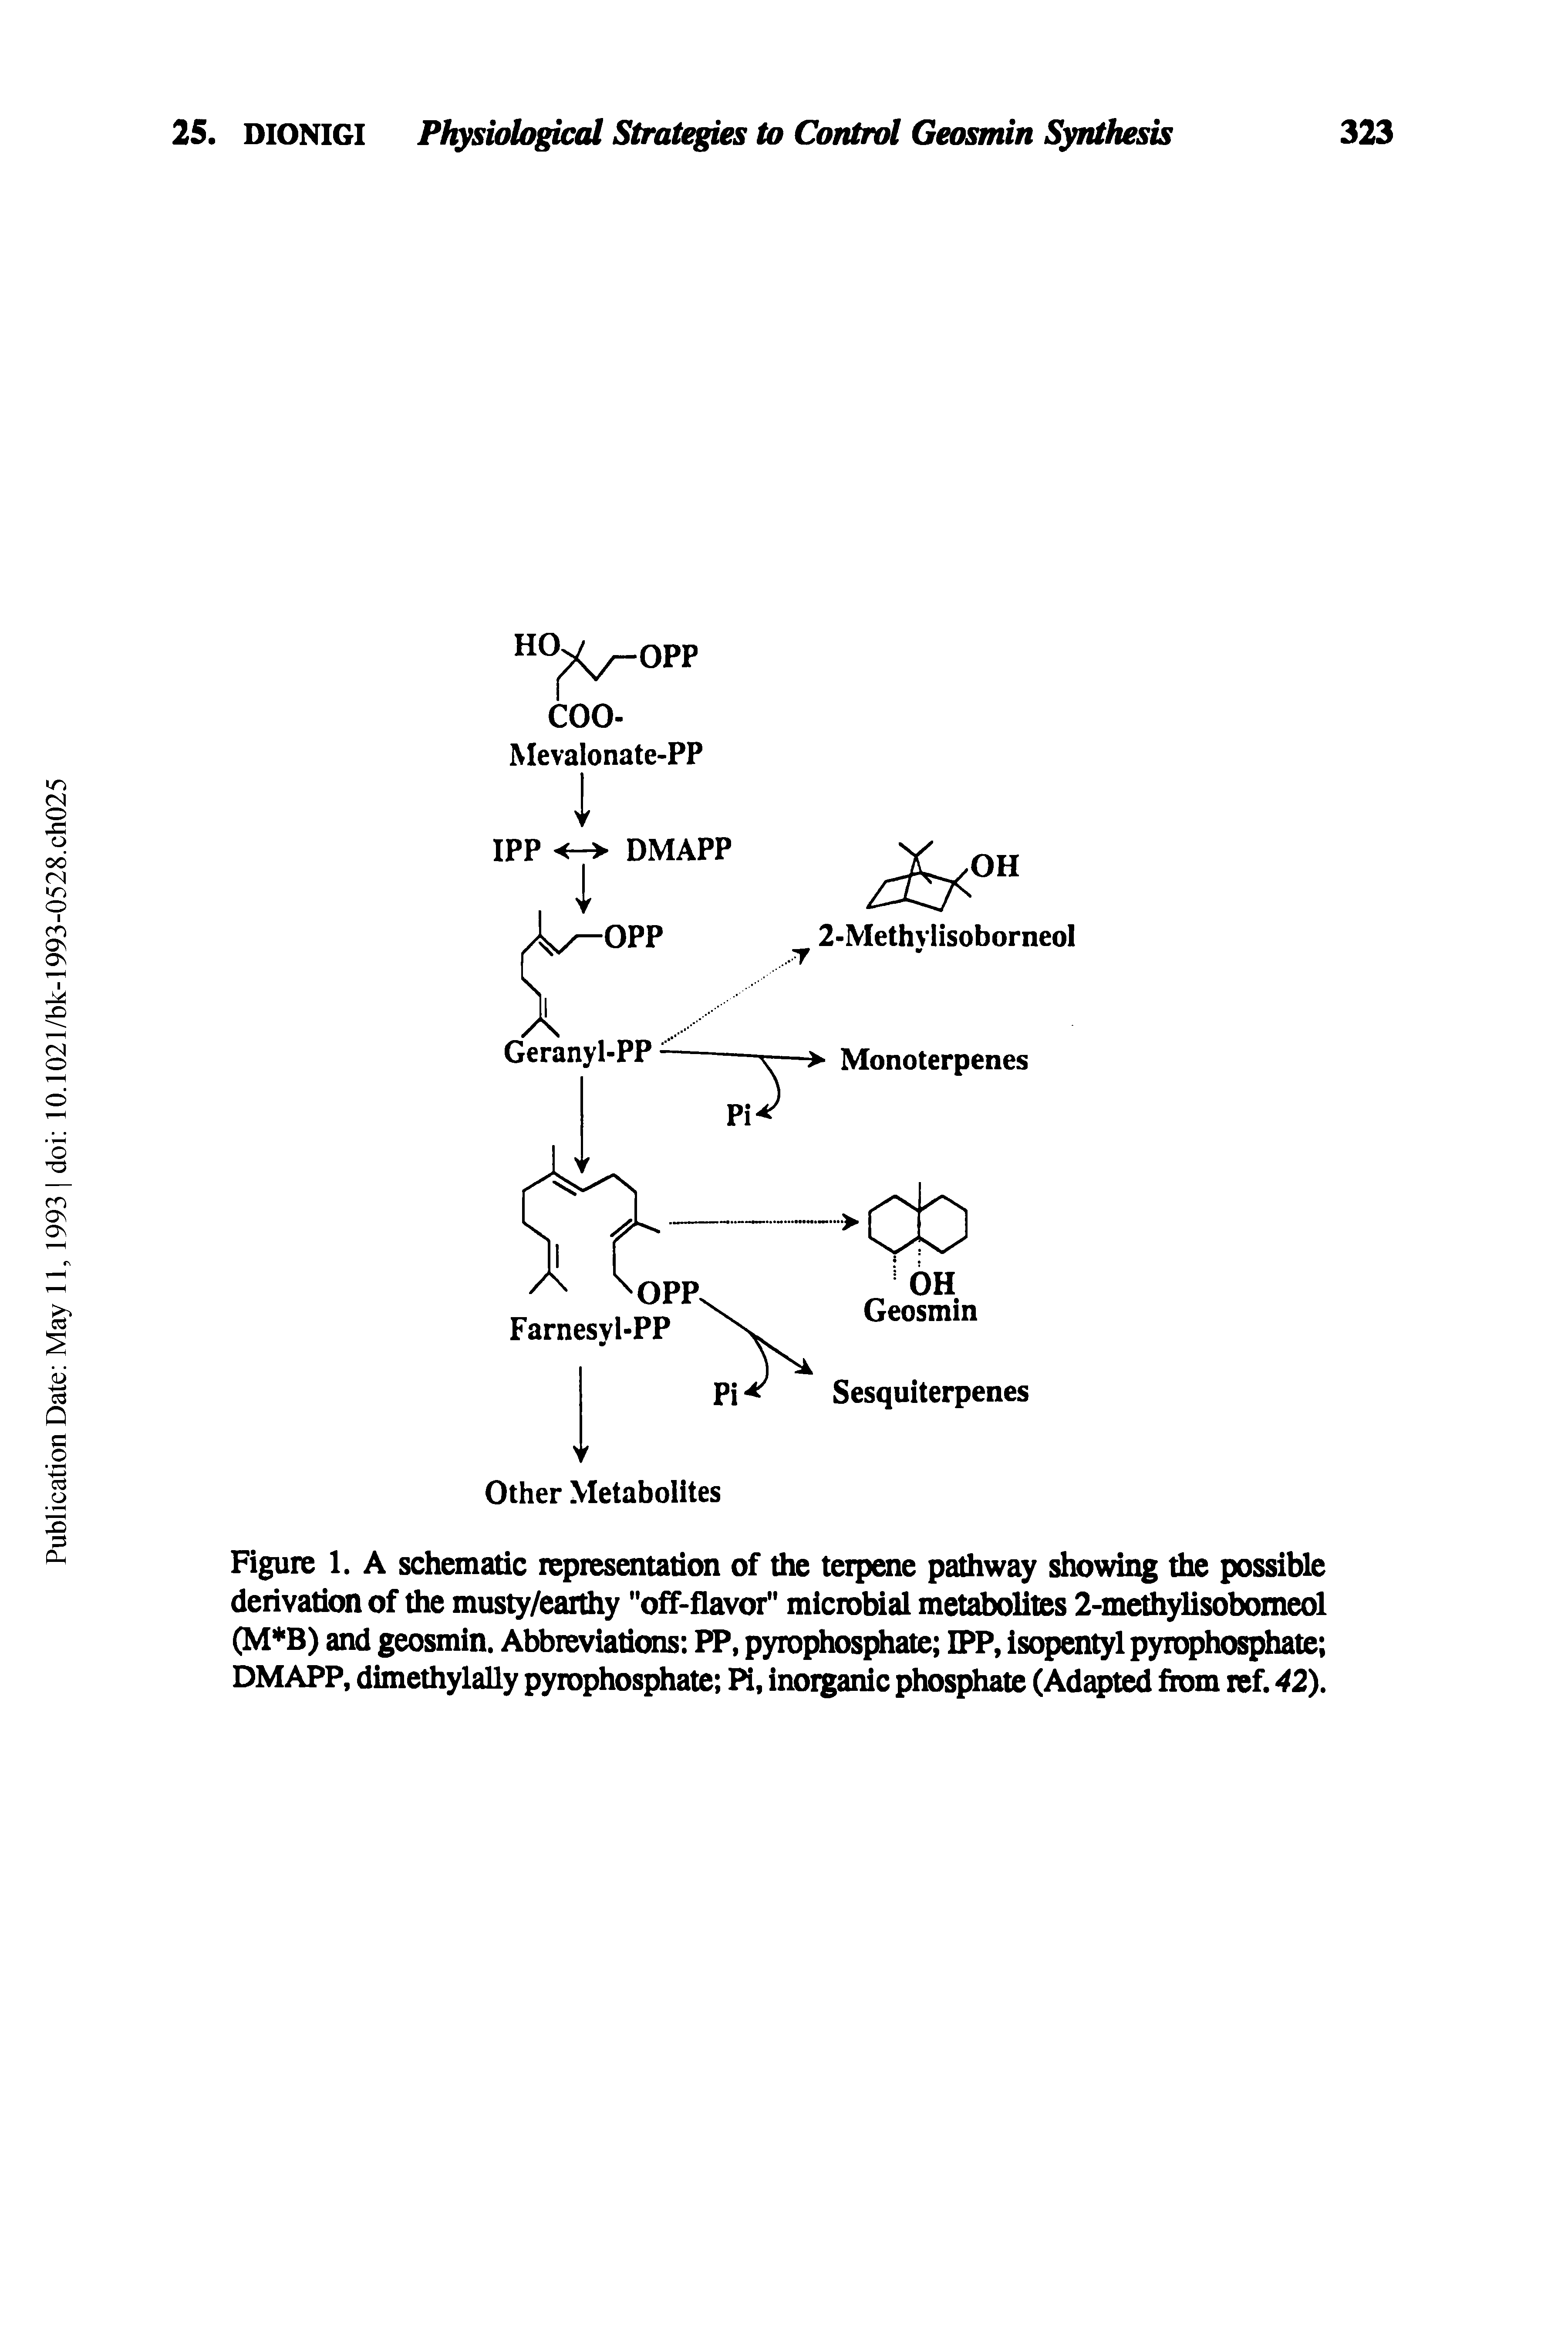 Figure 1. A schematic representation of the terpene pathway showing the possible derivation of the musty/earthy "off-flavor" microbial metabolites 2-methylisobomeol and geosmin. Abbreviations PP, pyrophosphate IPP, isopentyl pyrophosphate DMAPP, dimethylally pyrophosphate Pi, inorganic phosphate (Adapted from ref. 42),...